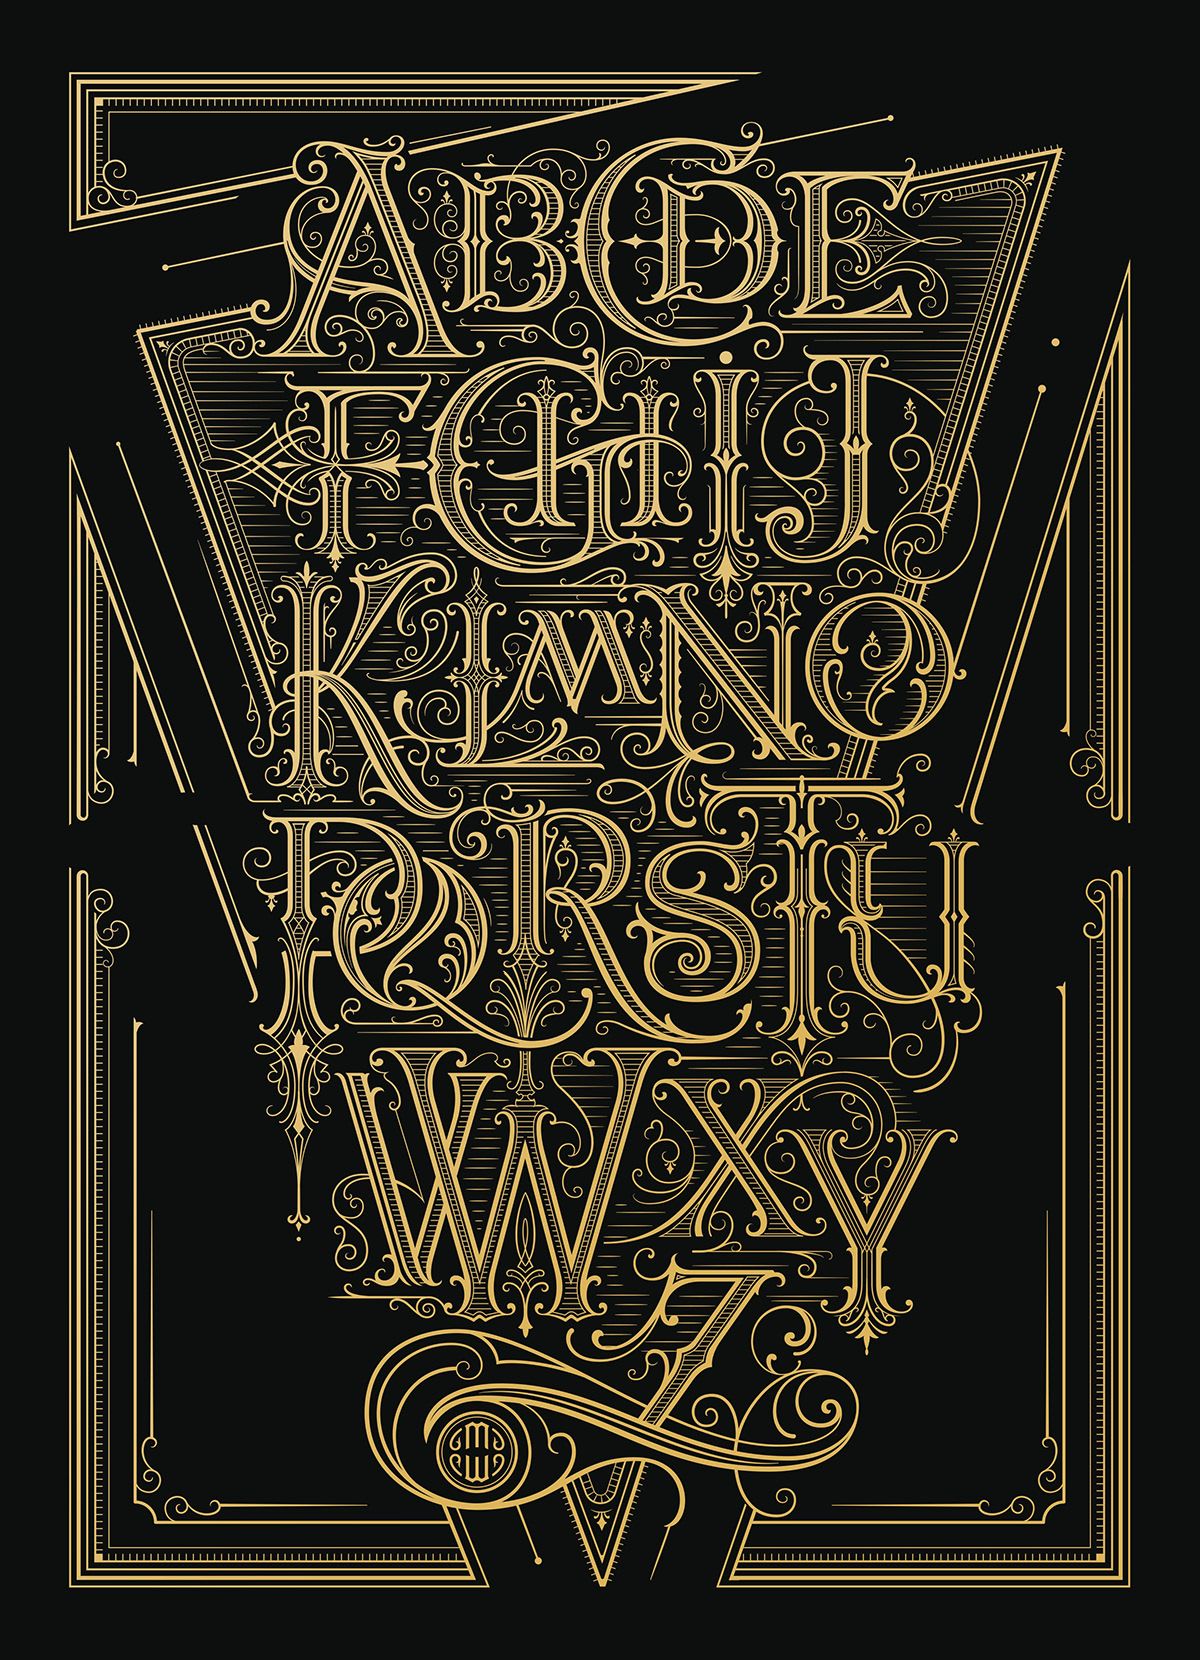 From A to Z: The Alphabet poster